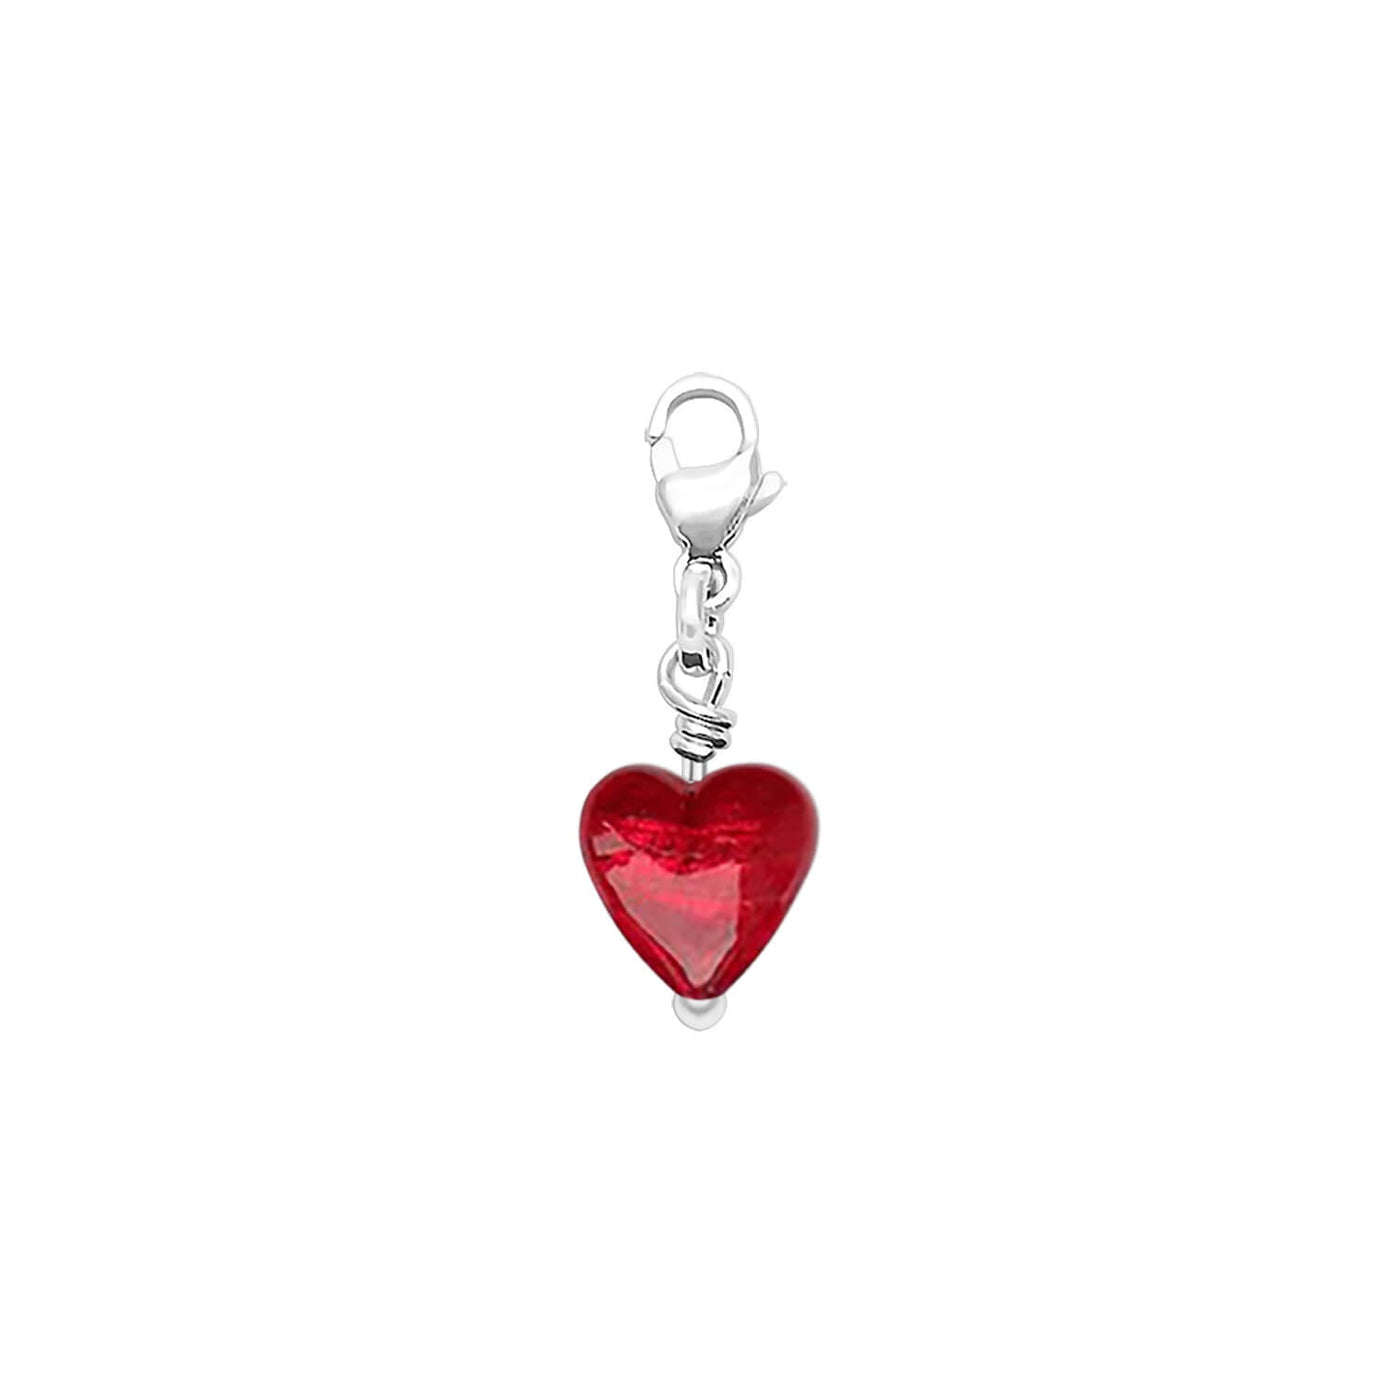 Charms for Bracelet - Small Red Heart - Charms